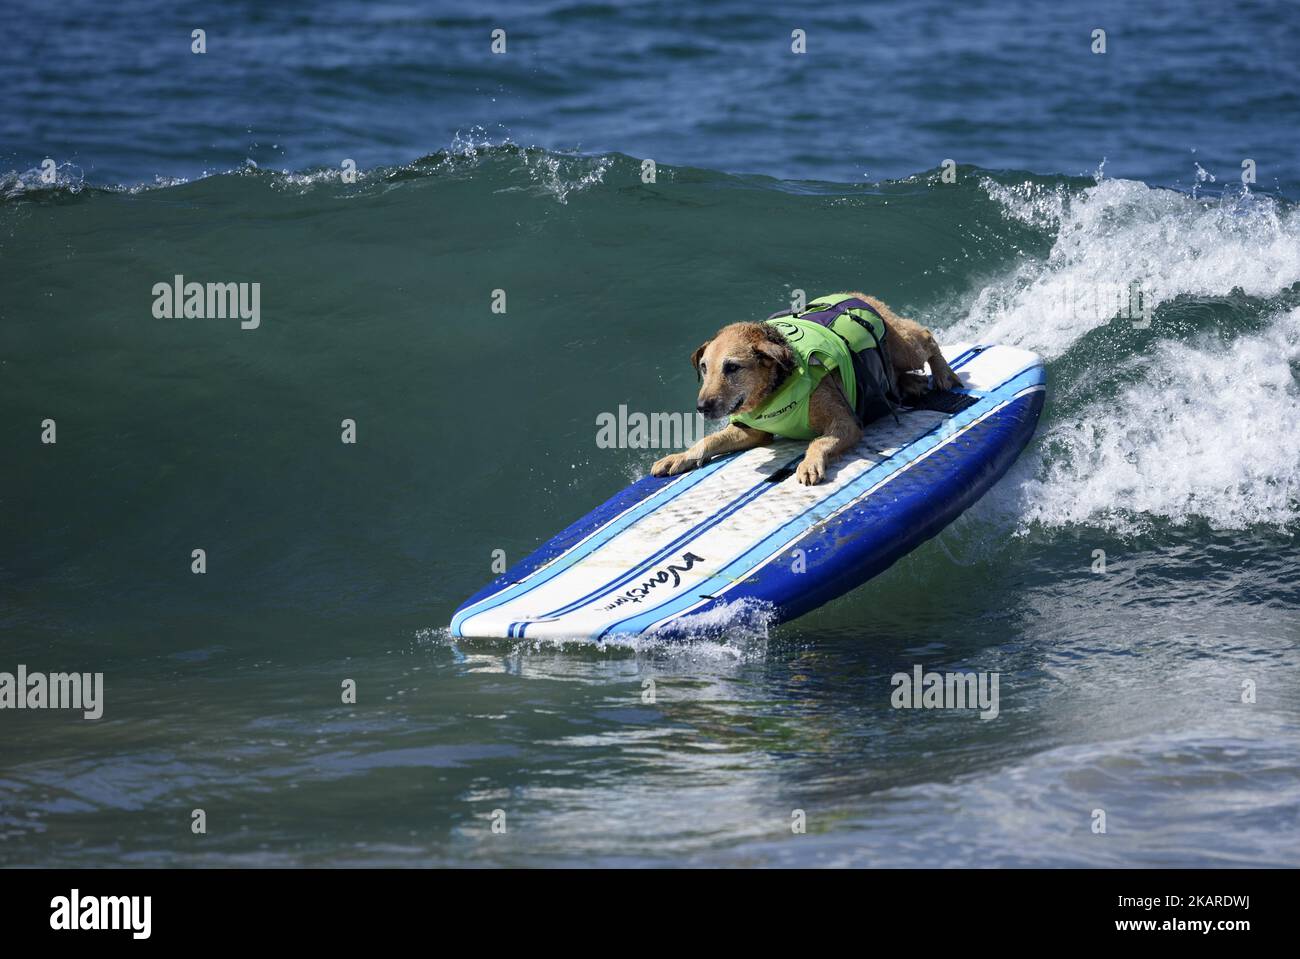 A surfing dog rides a wave during the Surf City Surf Dog competition in Huntington Beach California on September 23, 2017. Over 40 dogs from the USA, Brazil and Canada competed in the annual Surf City Surf Dog Competition in which dogs surfed on their own or in tandem with their humans.(Photo by: Ronen Tivony) (Photo by Ronen Tivony/NurPhoto) Stock Photo